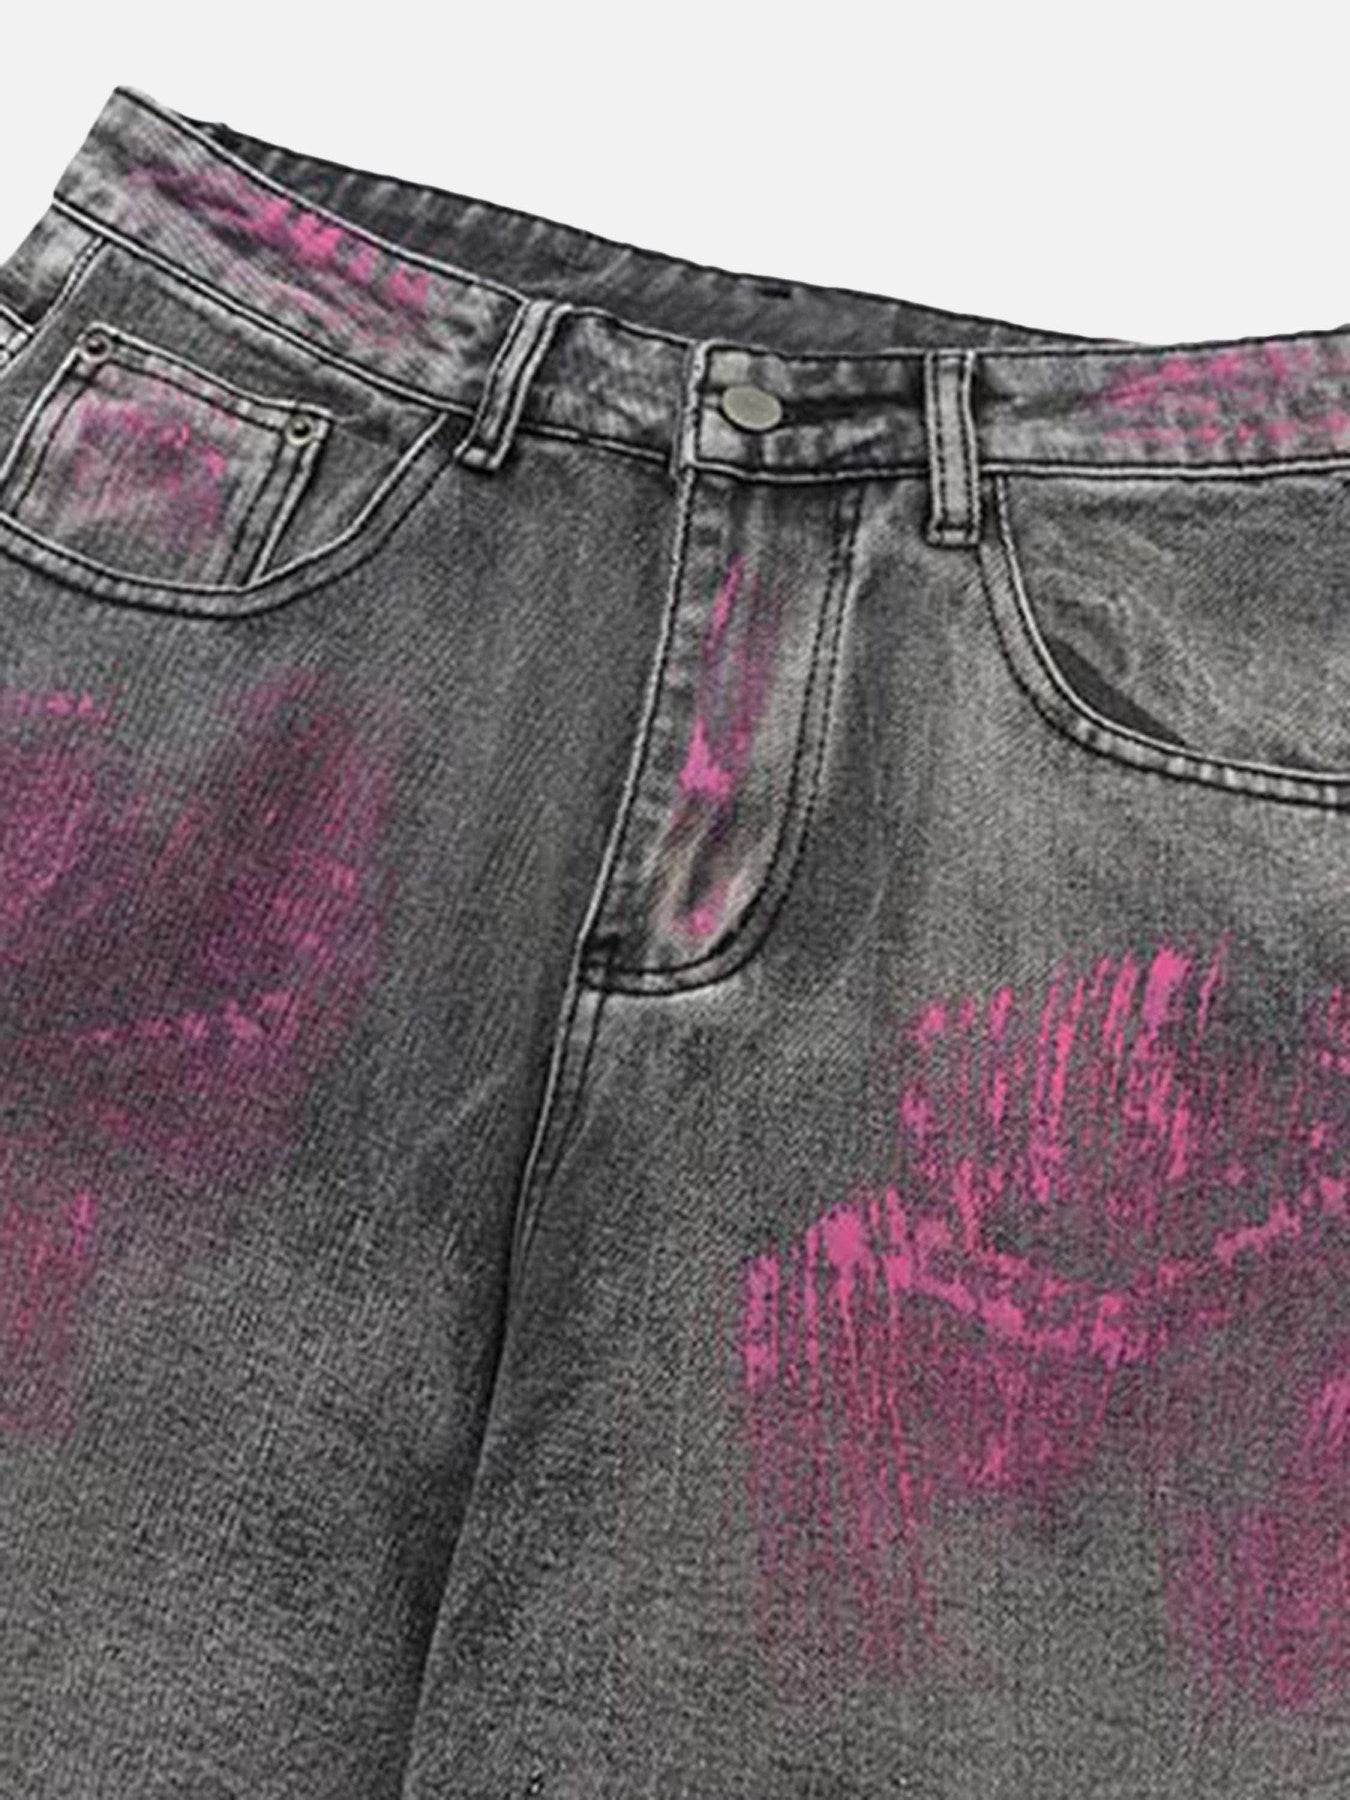 Thesupermade Graffiti Airbrushed Washed And Distressed Jeans